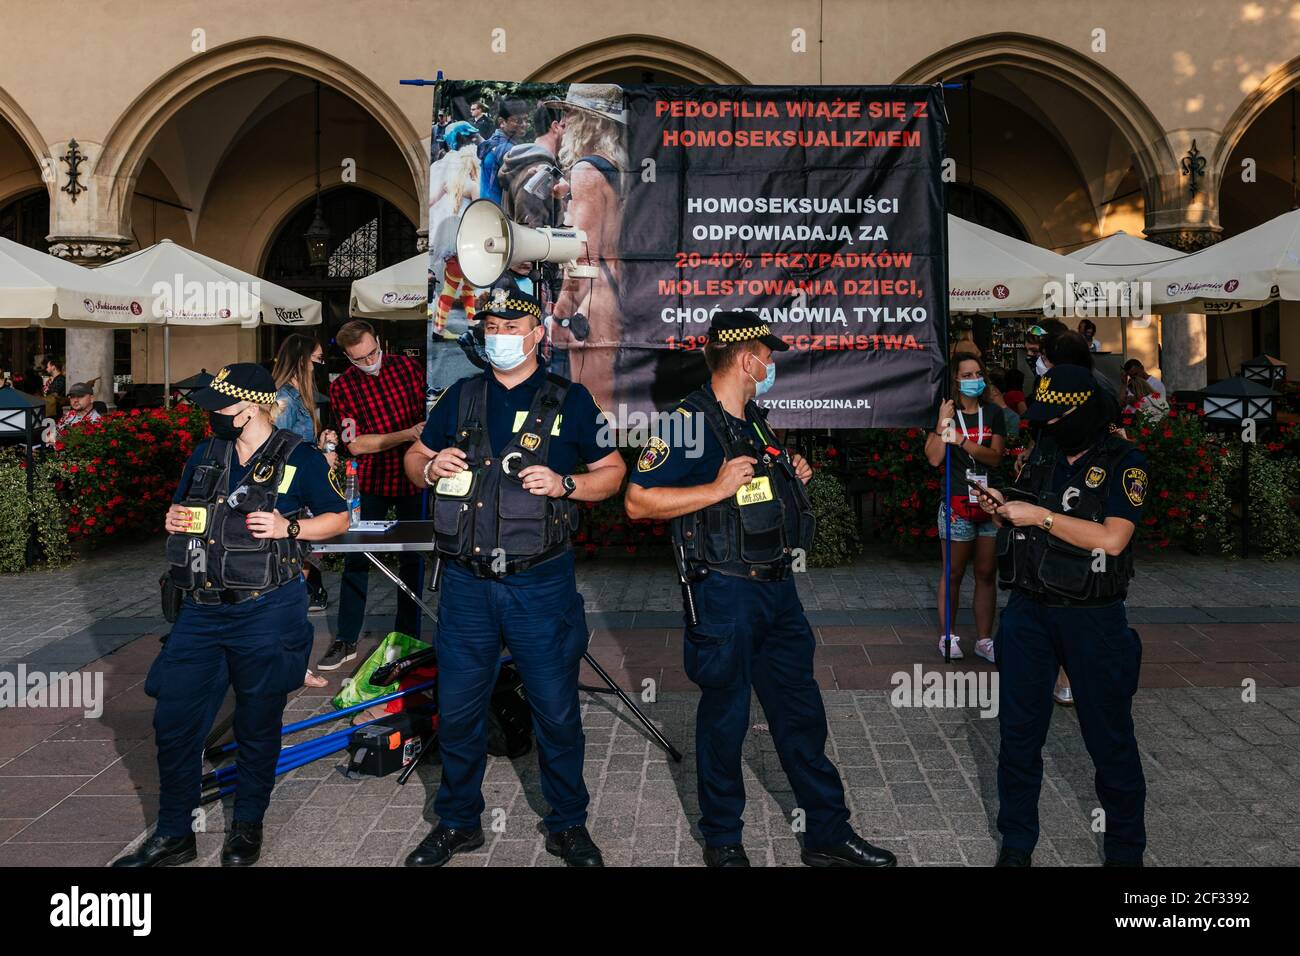 A group of municipal policeman separates participants of counterdemonstration holding disrespectful poster suggesting that homosexual people often are Stock Photo